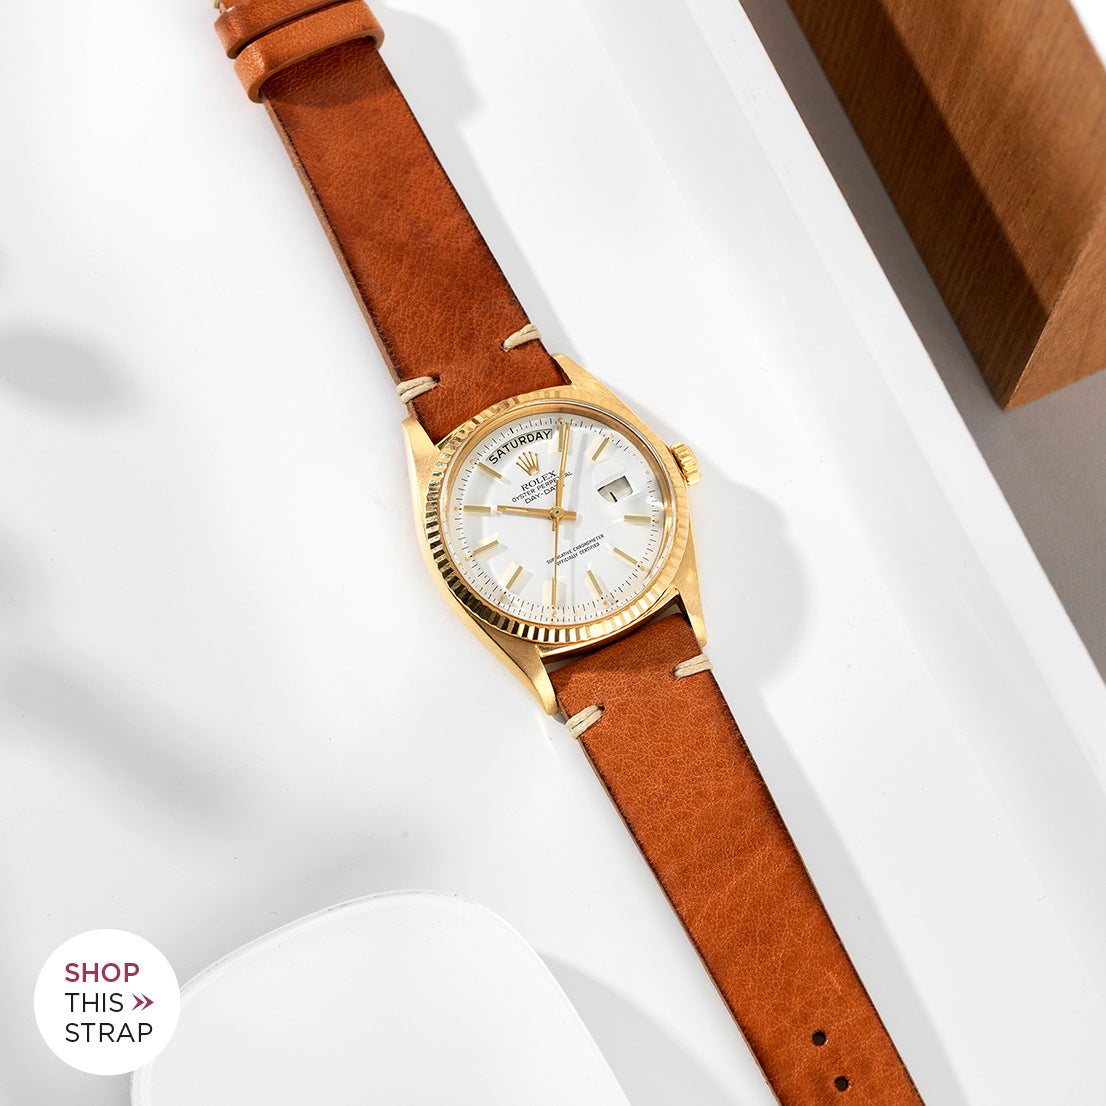 Bulang and Sons_Strap Guide _The Day Date White Dial_Caramel Brown Leather Watch Strap